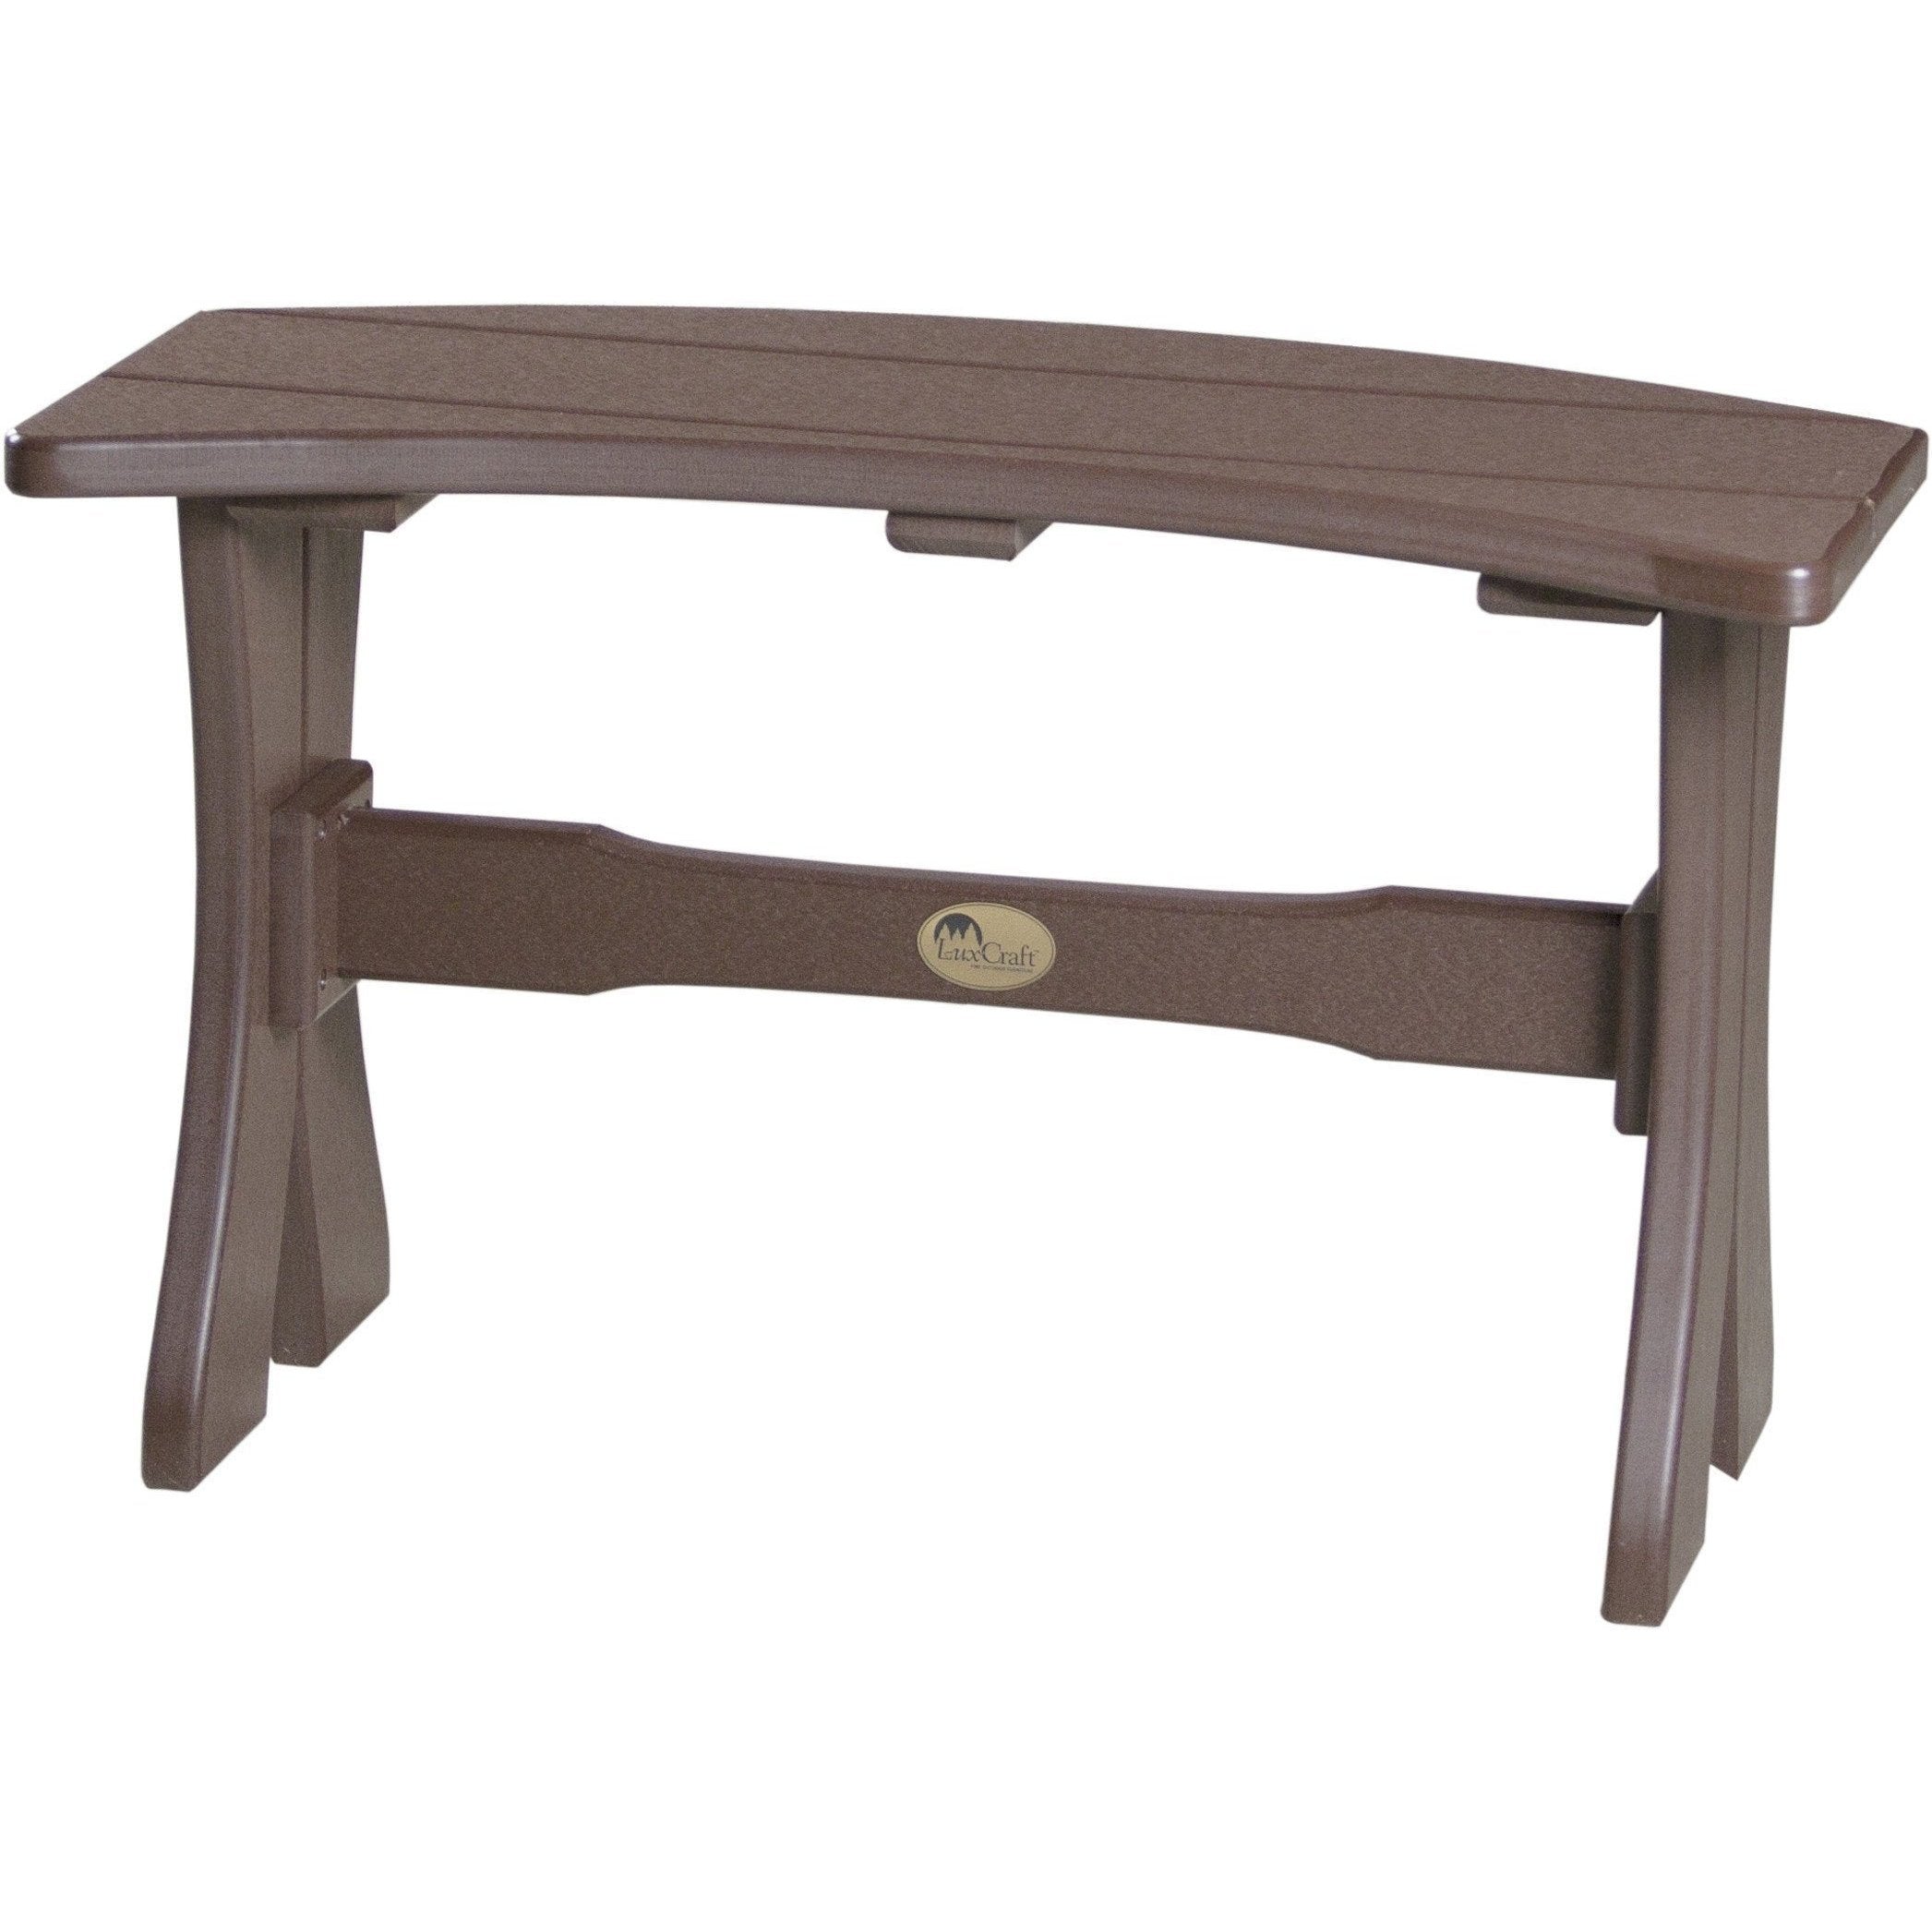 Outdoor 28" Table Bench Chestnut Brown